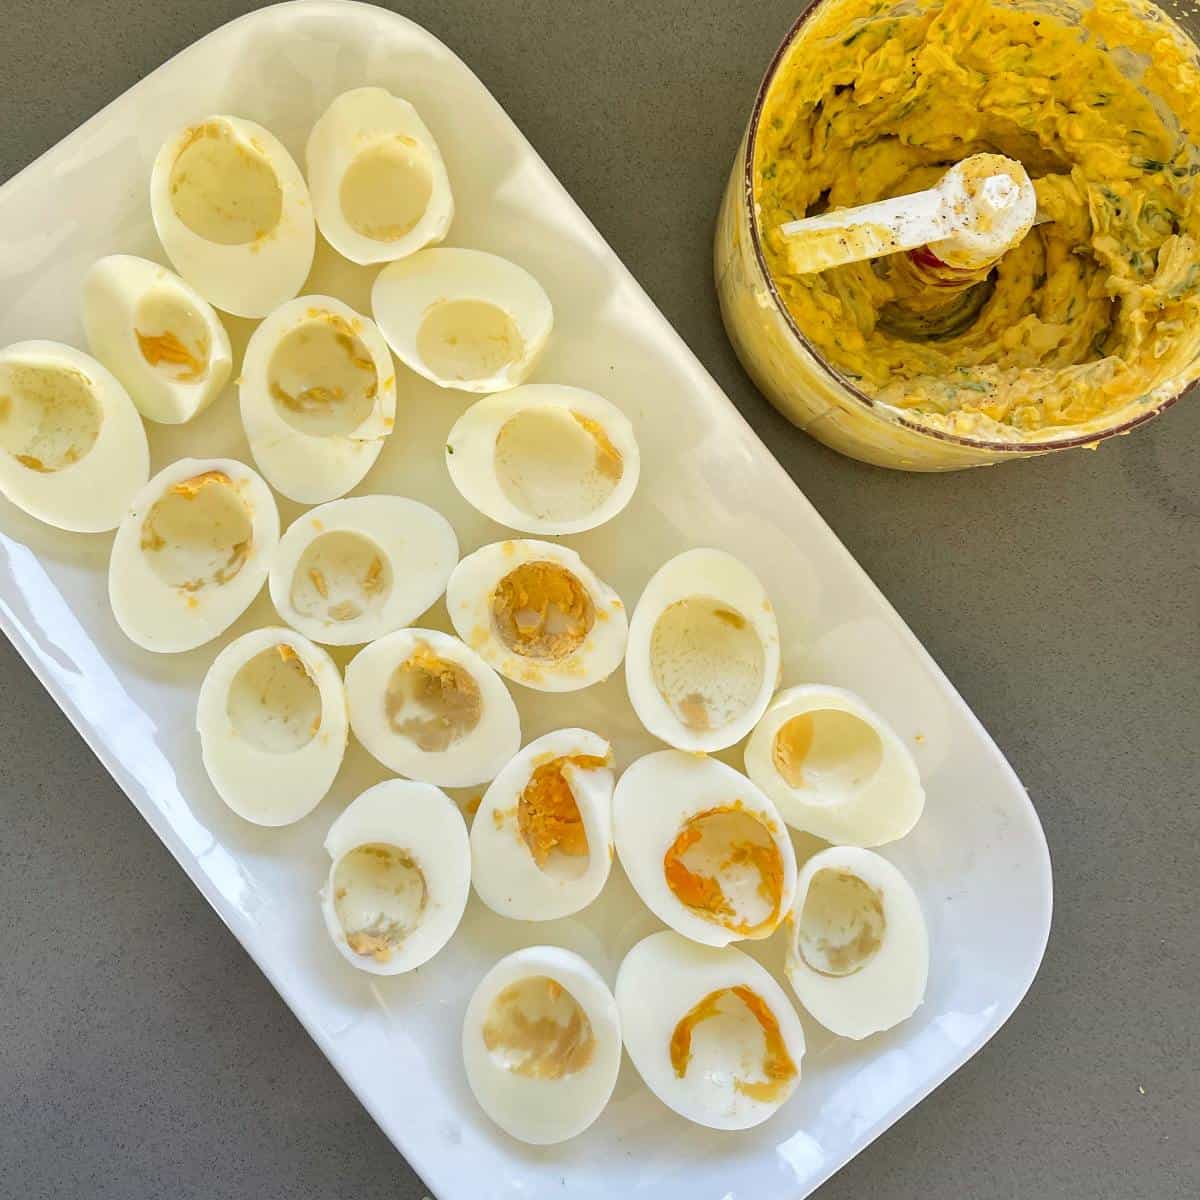 Boiled eggs cut in half with the yoke removed. The curried egg mixture in a small dish to the side.